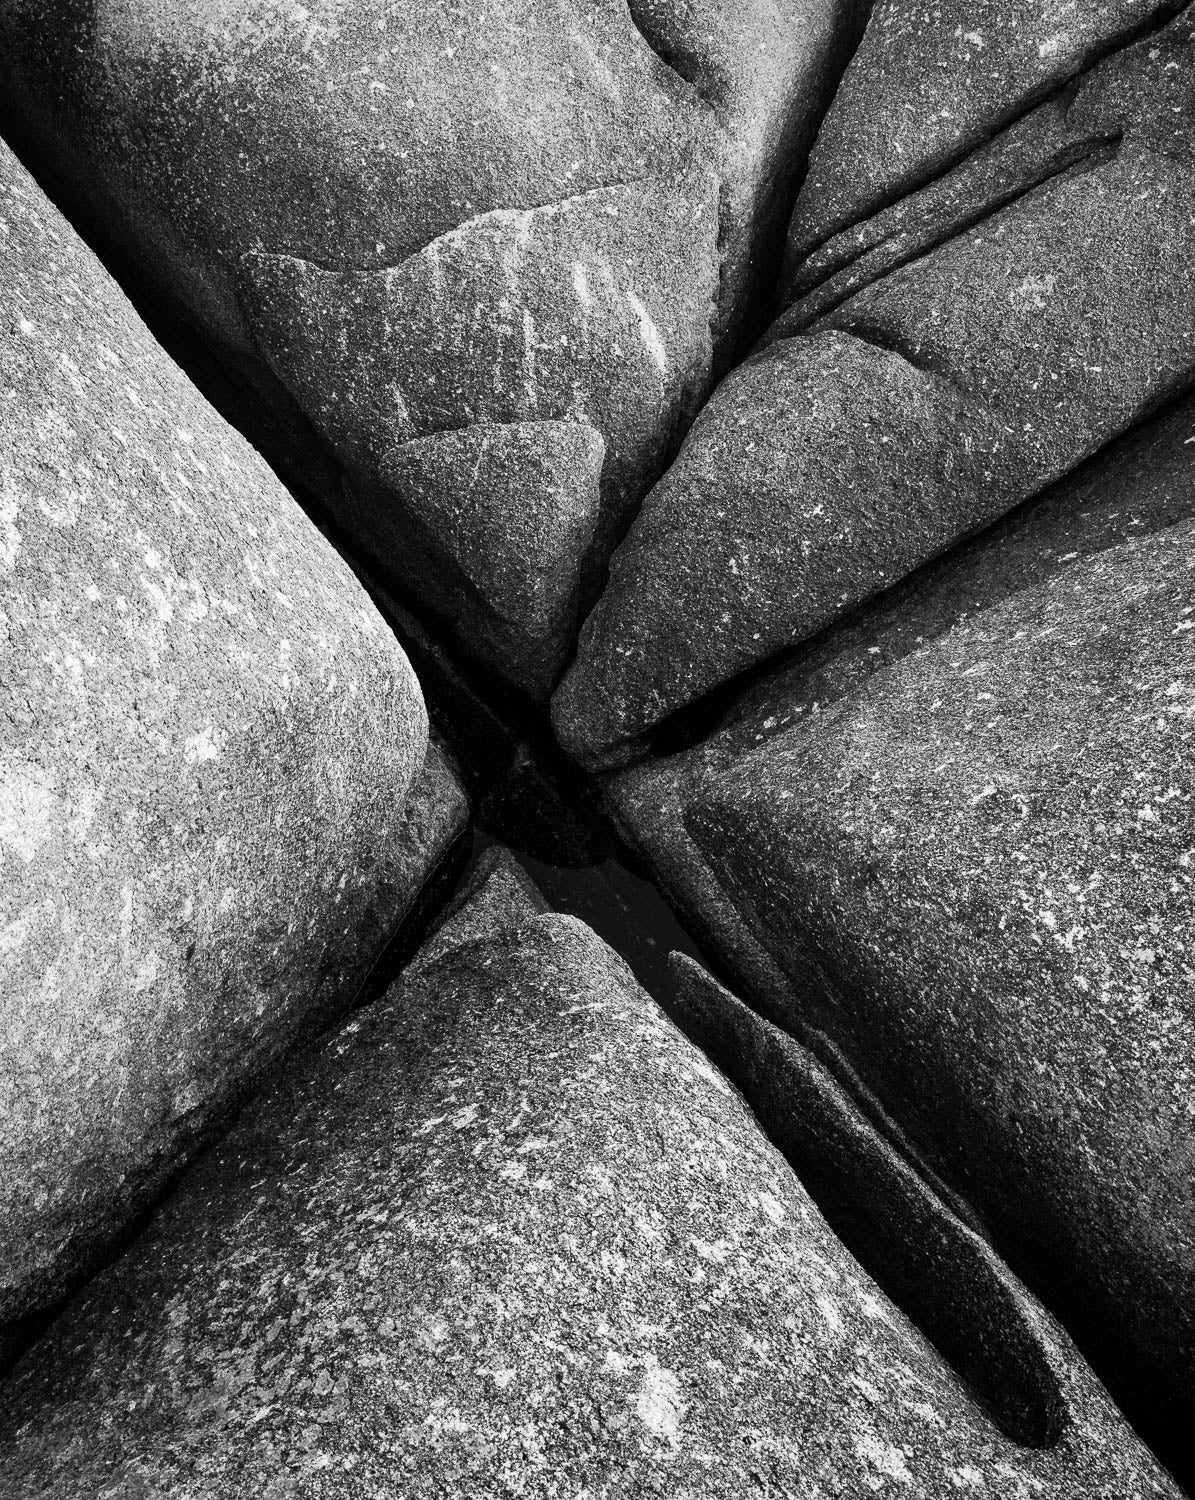 Parallel greyish-colored great boulders with some space in between, and some cracks in the topmost quadrant, Bay of Fires rocks grooves 